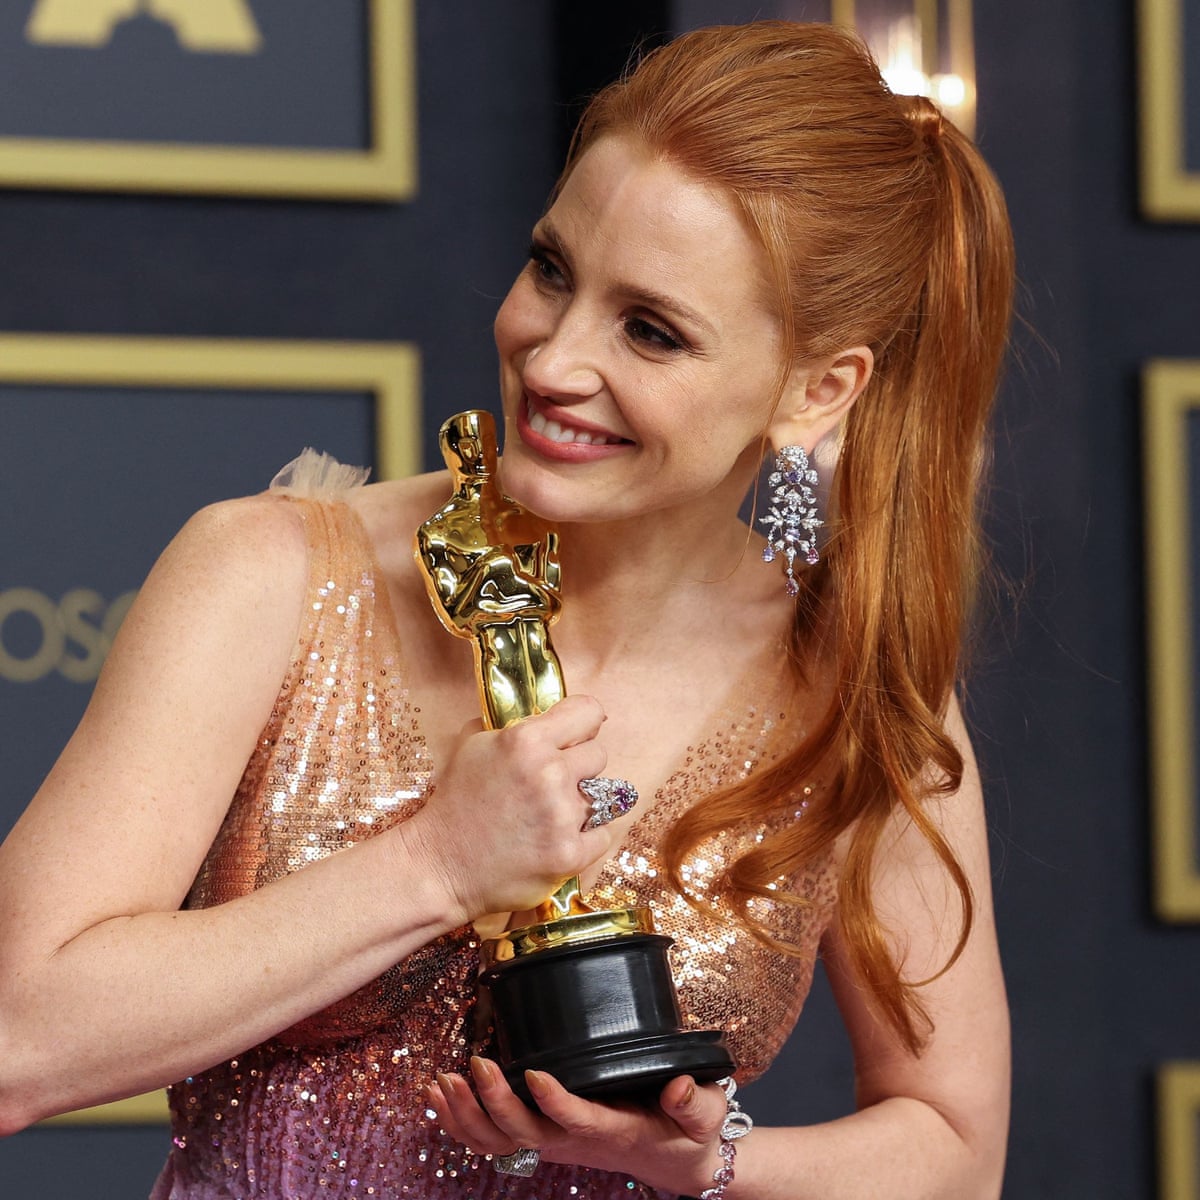 Jessica Chastain Wins Best Actress Oscar for “The Eyes of Tammy Faye”, Says She Was Inspired by Televangelist’s ‘Radical Acts of Love’